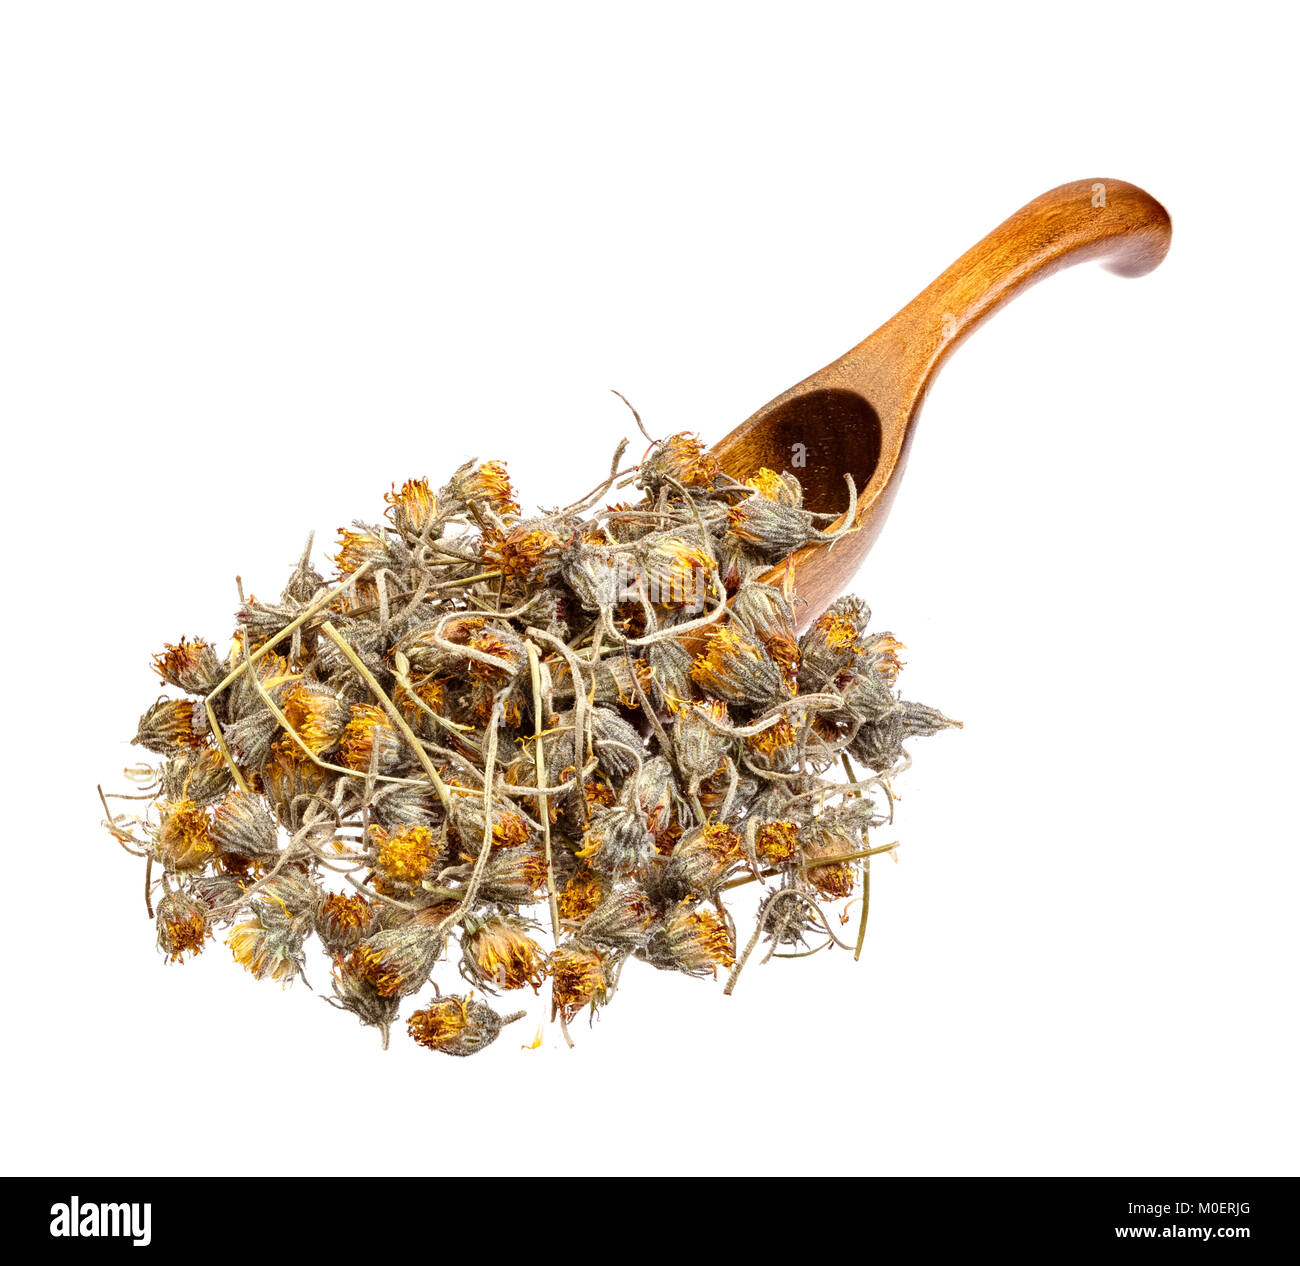 Dried Hawkweed flowers on the wooden spoon. Stock Photo